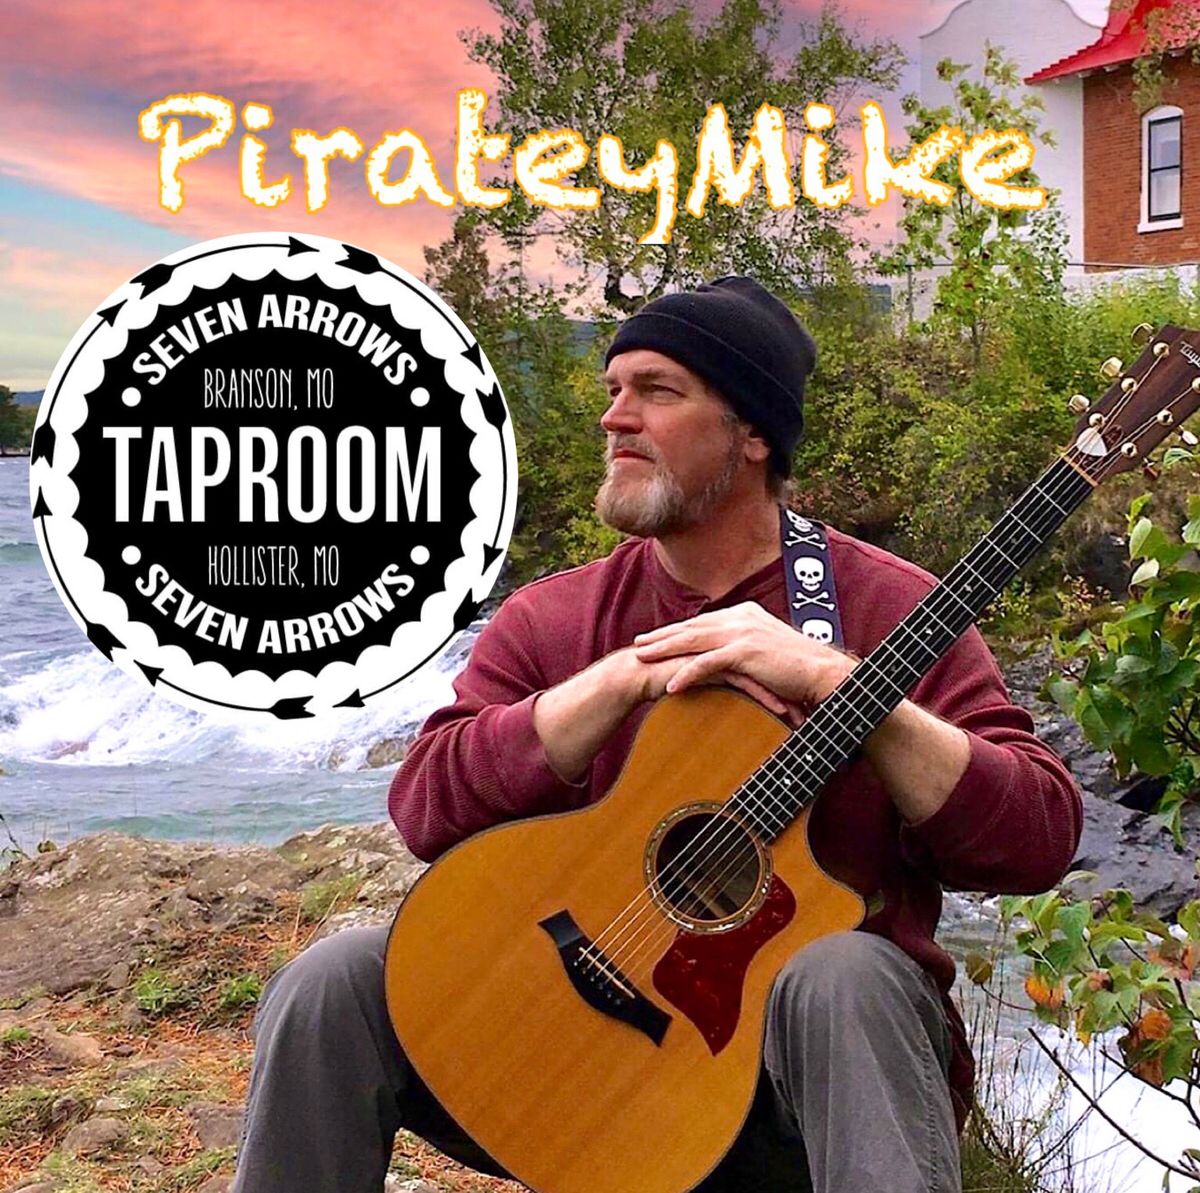 PirateyMike @ Seven Arrows Taproom